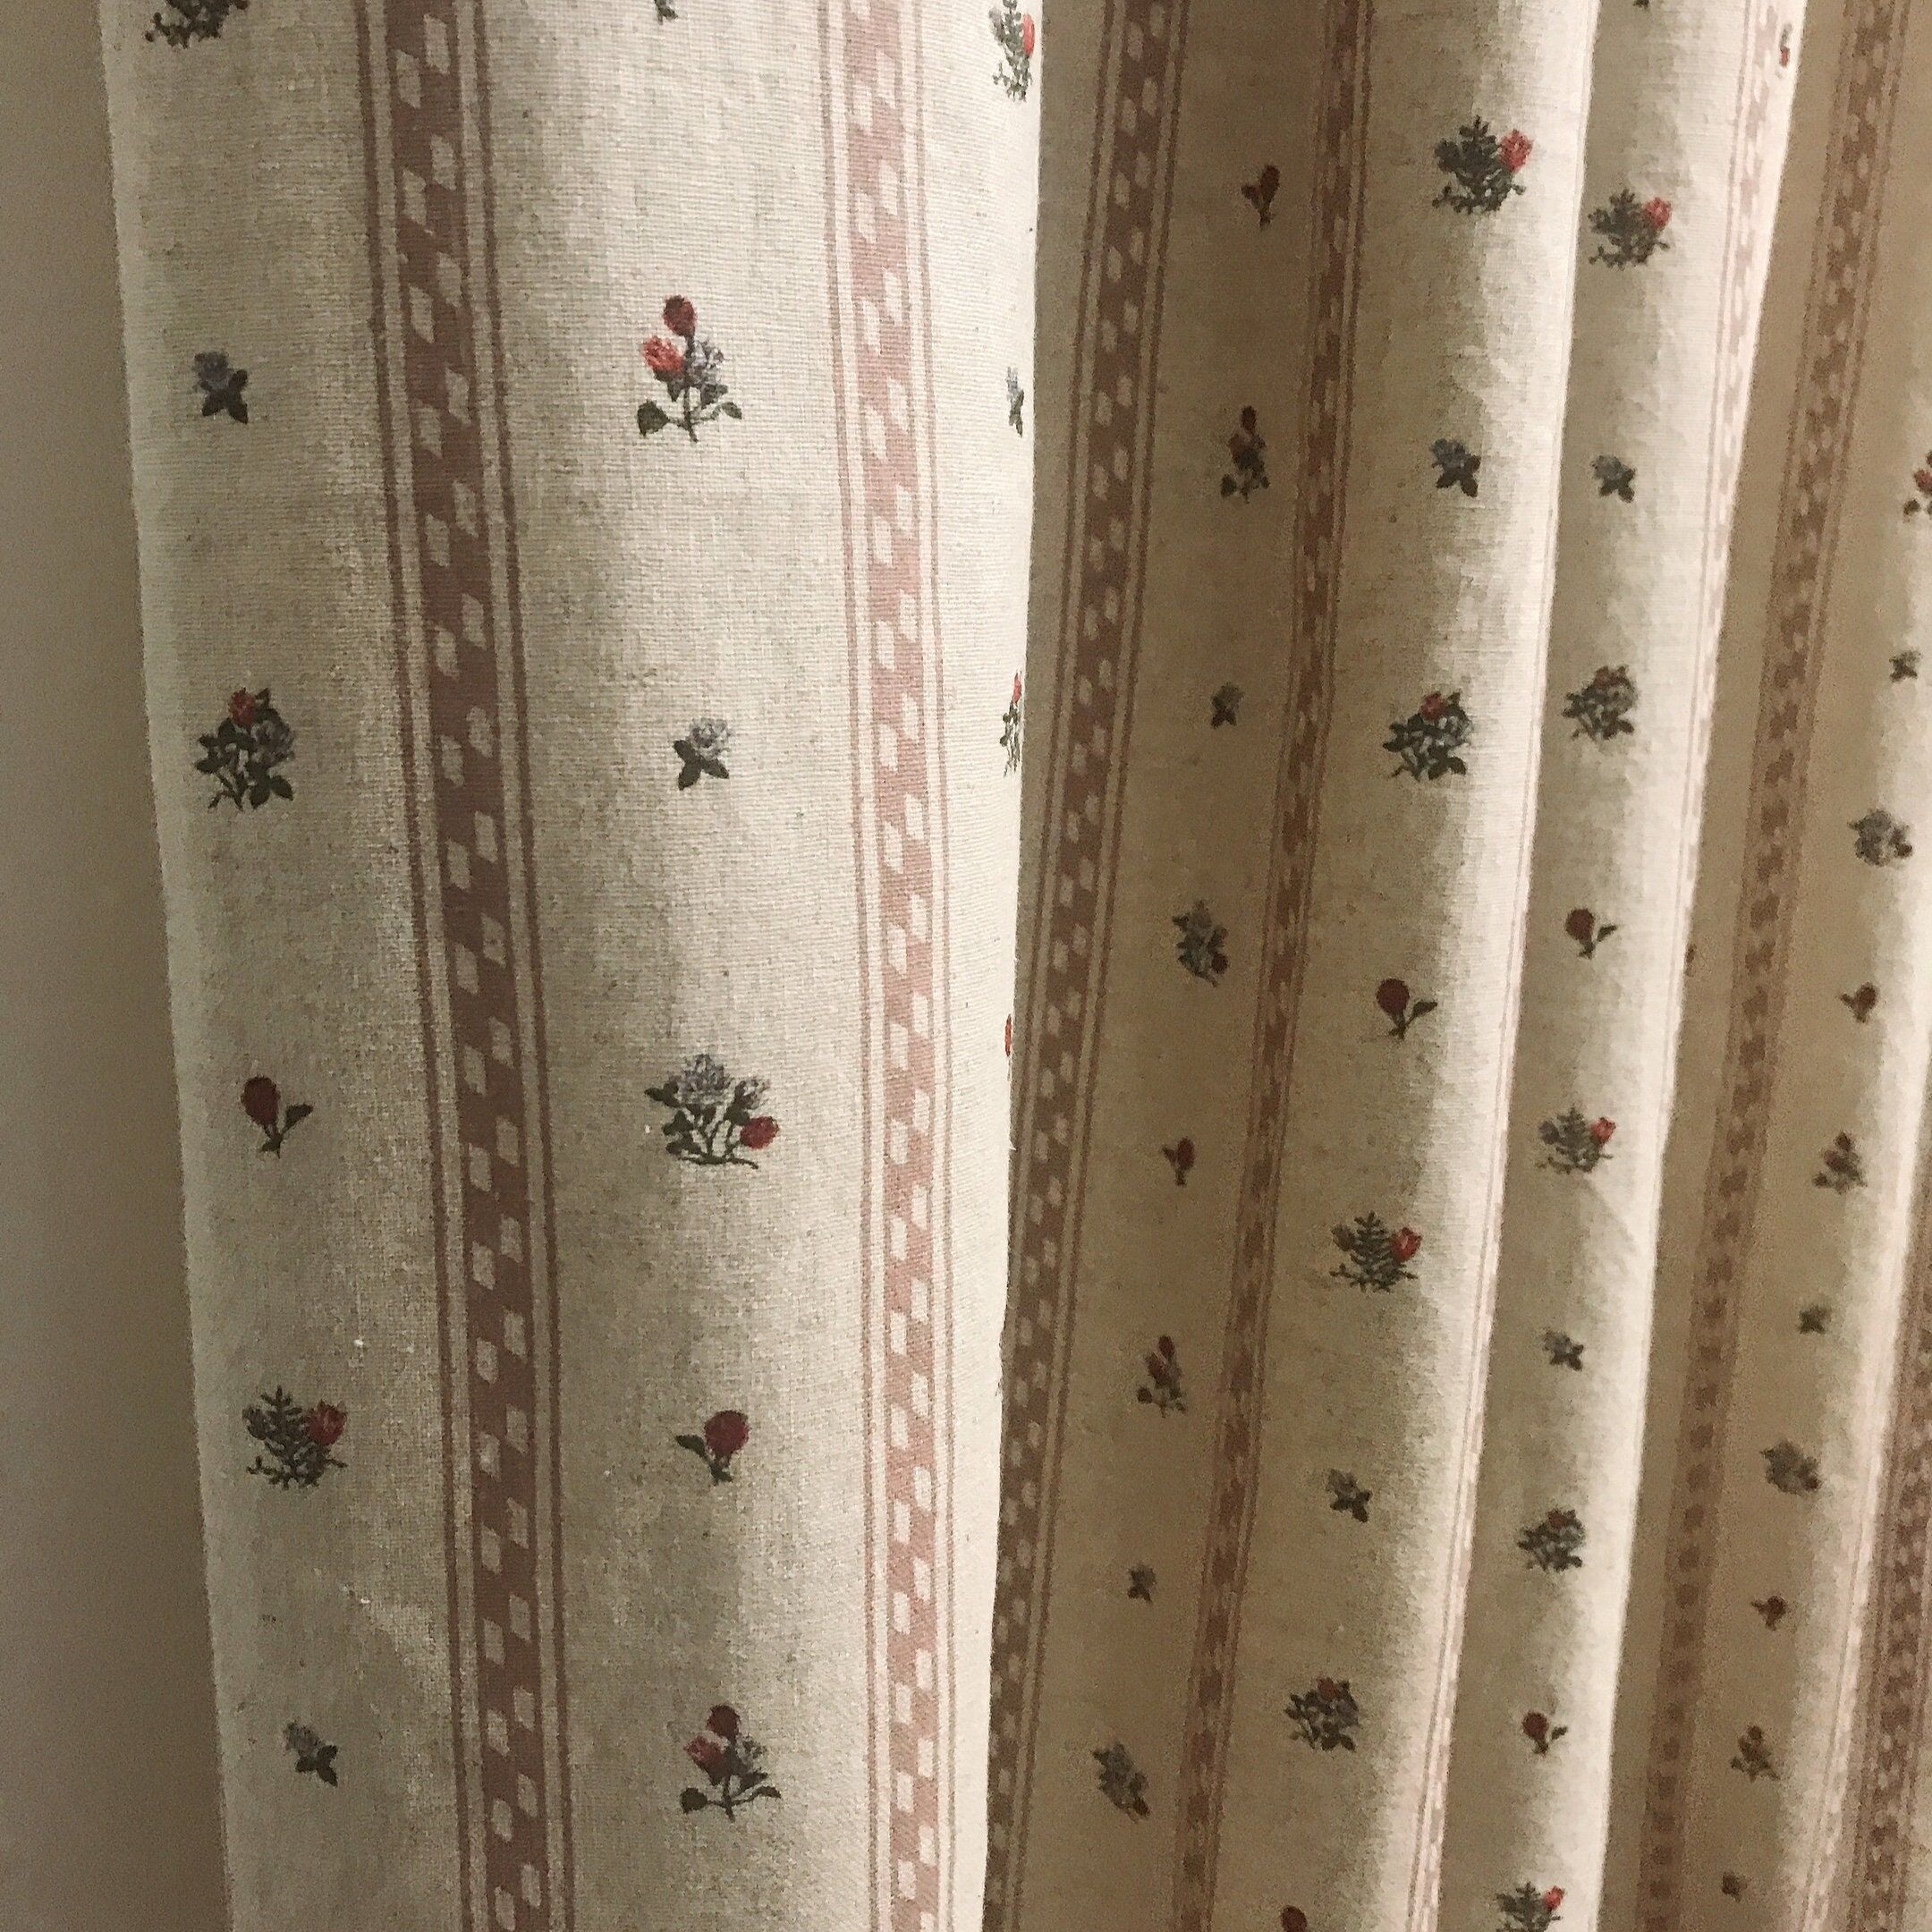 Elevate Your Décor with Beautiful Floral
Curtains